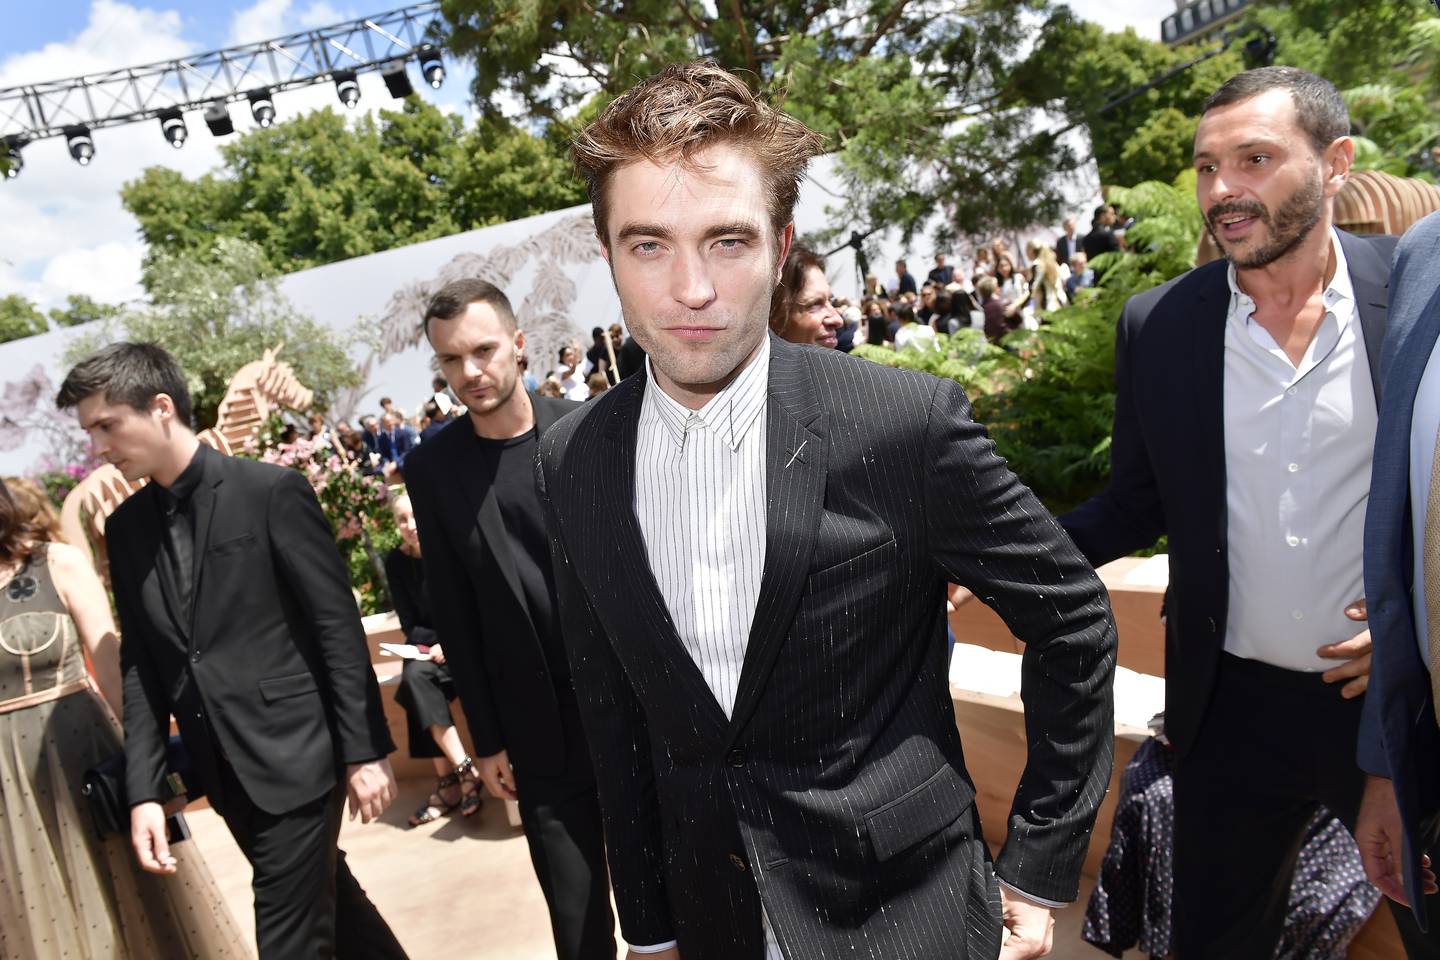 Robert Pattinson attends the Christian Dior autumn/winter 2017-2018 show during Paris Fashion Week on July 3, 2017 in Paris. Getty Images 